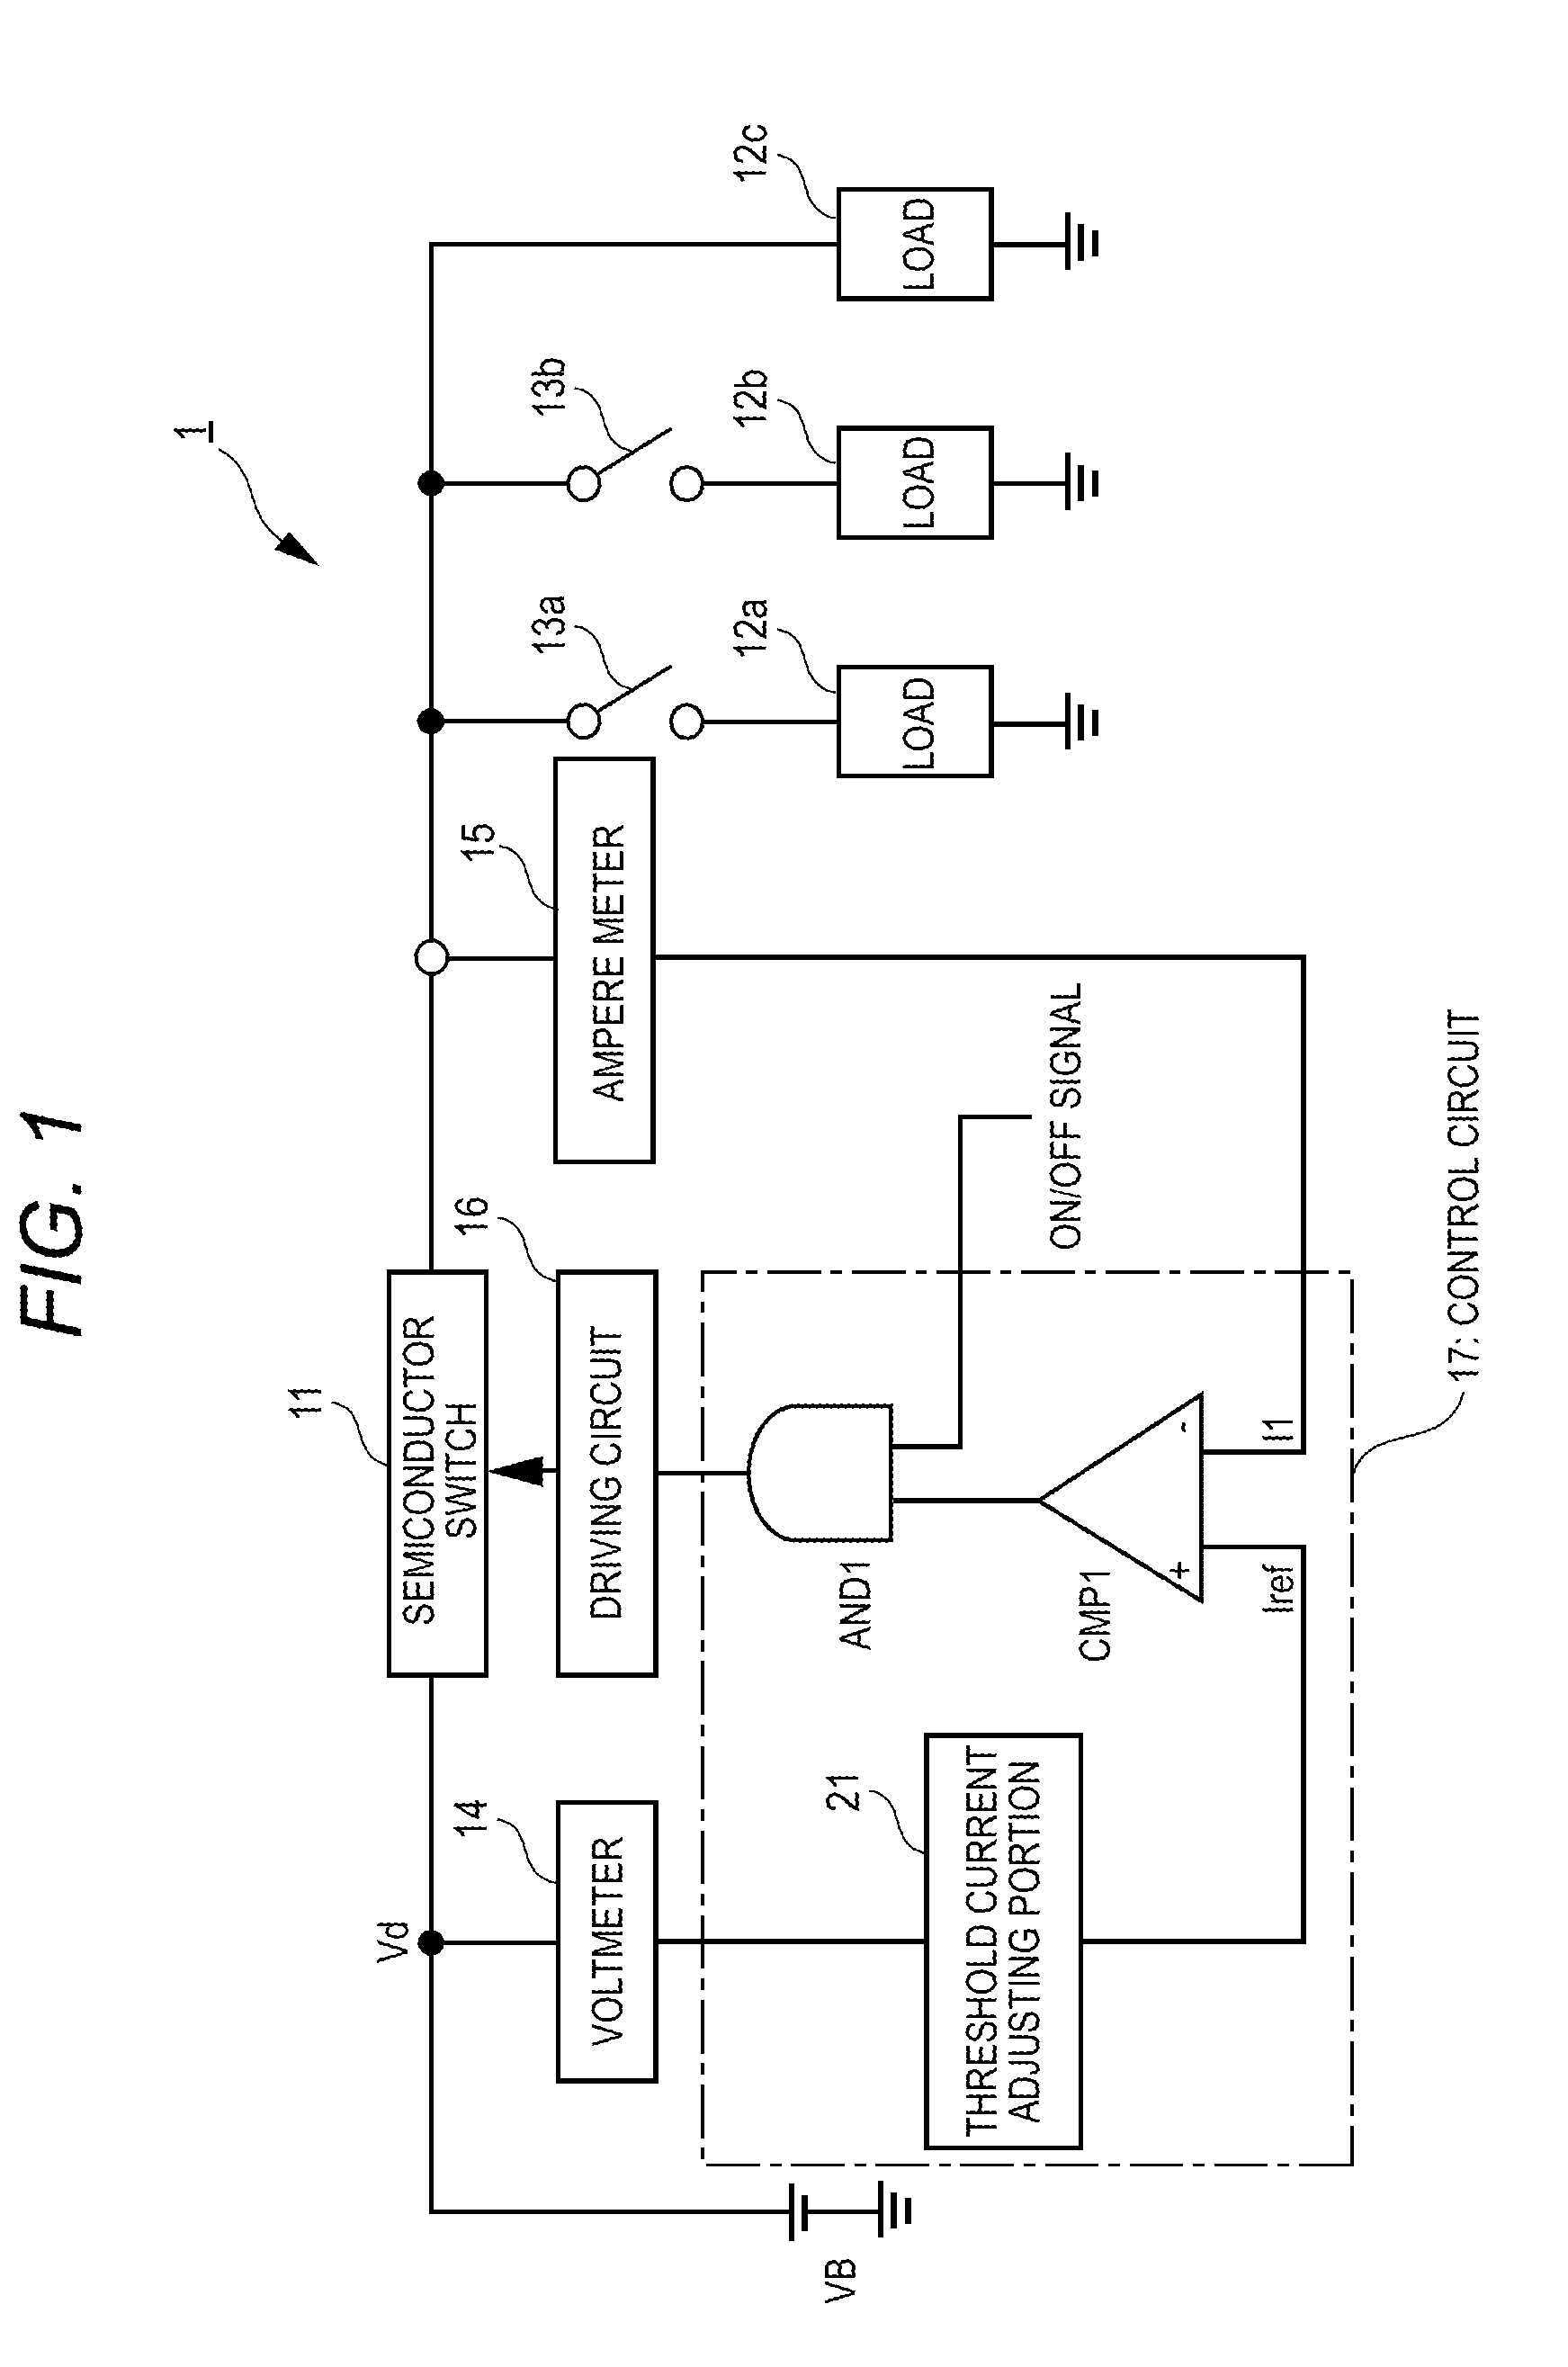 Load circuit protection device